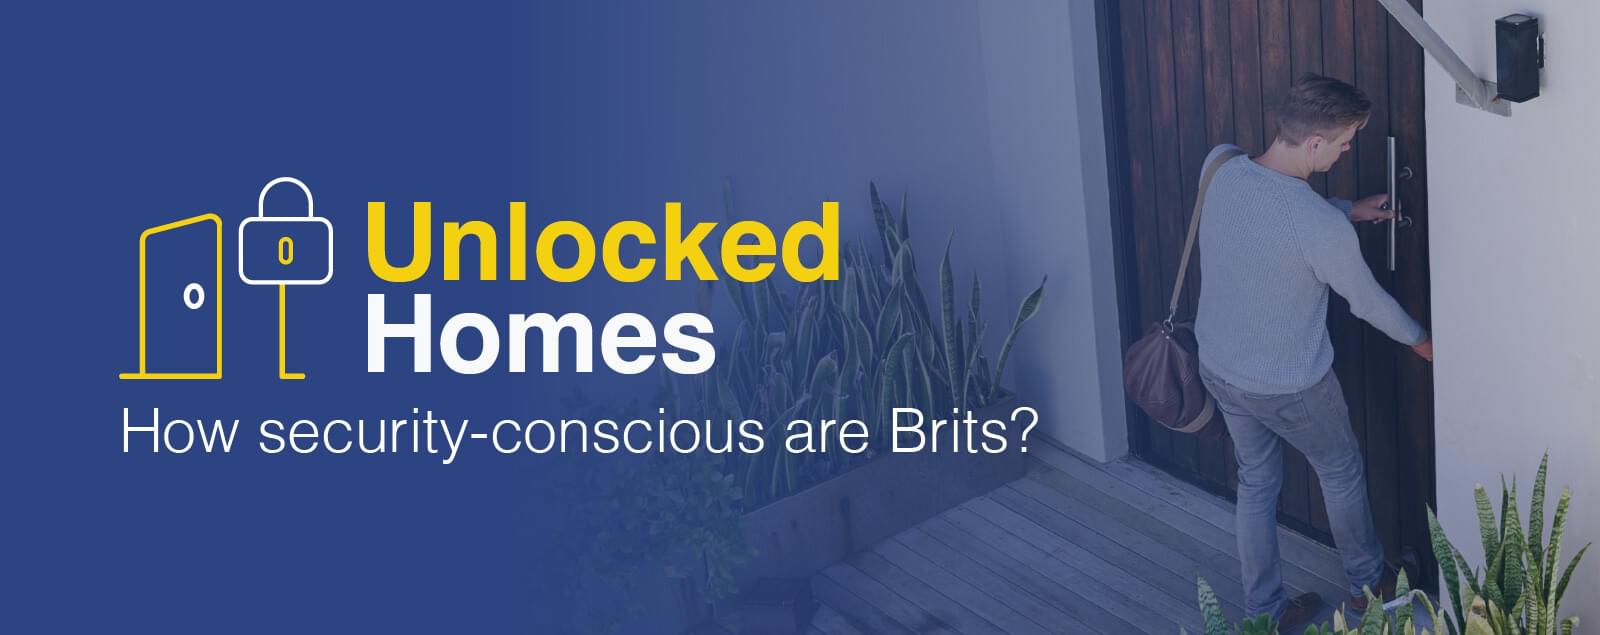 Unlocked homes blog banner with man entering home background